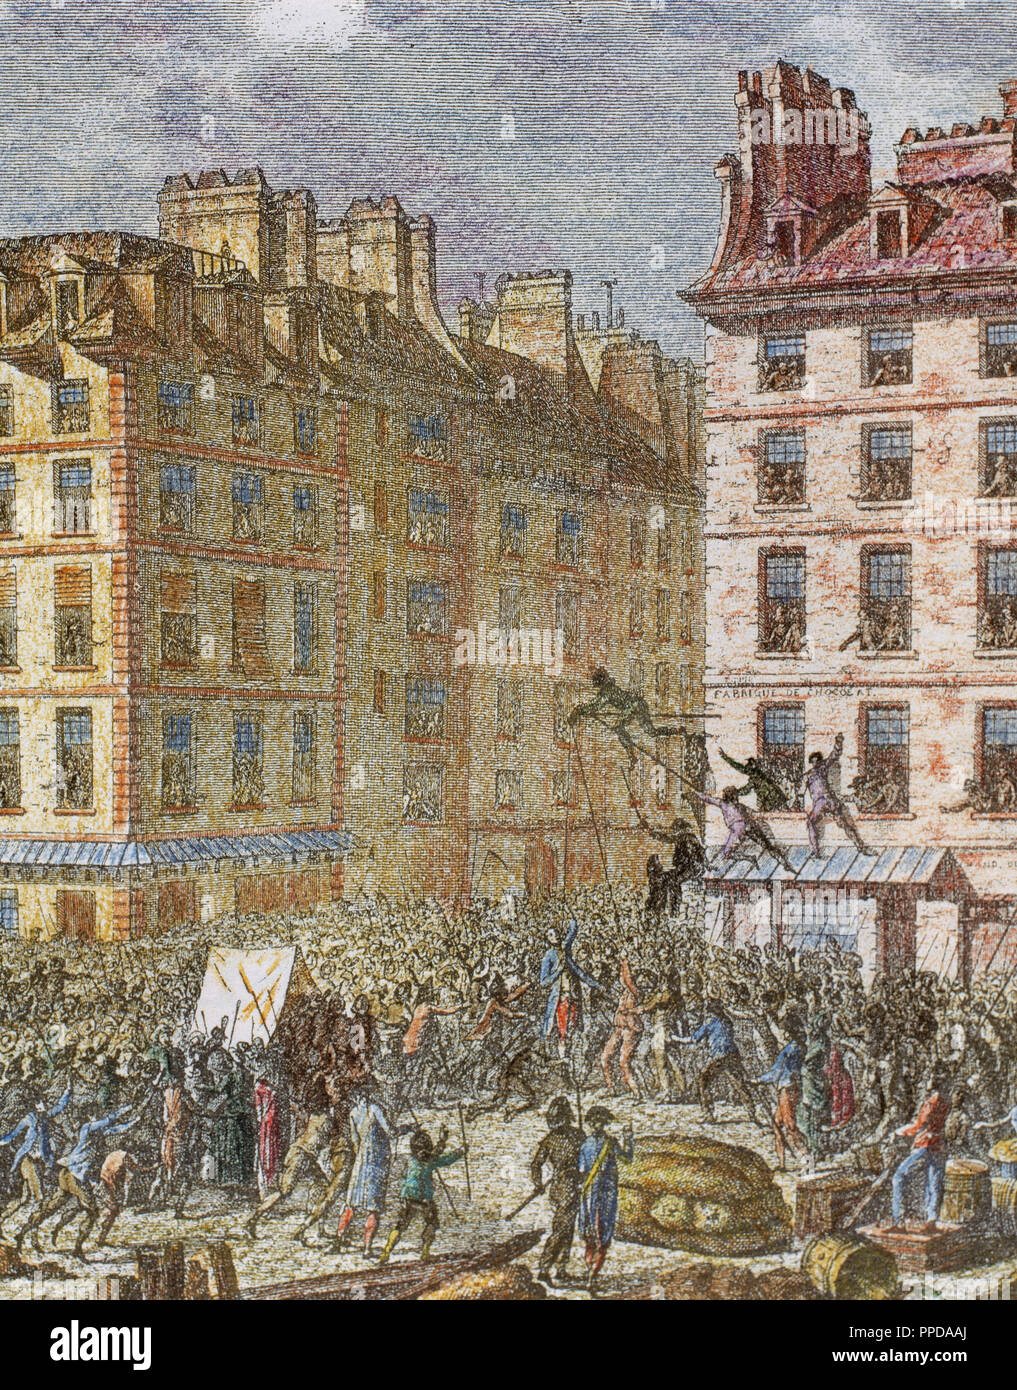 French Revolution (1789-1799). Foulon execution on 22 july 1789. Colored engraving of 'Paris à travers les Ages.'. Stock Photo